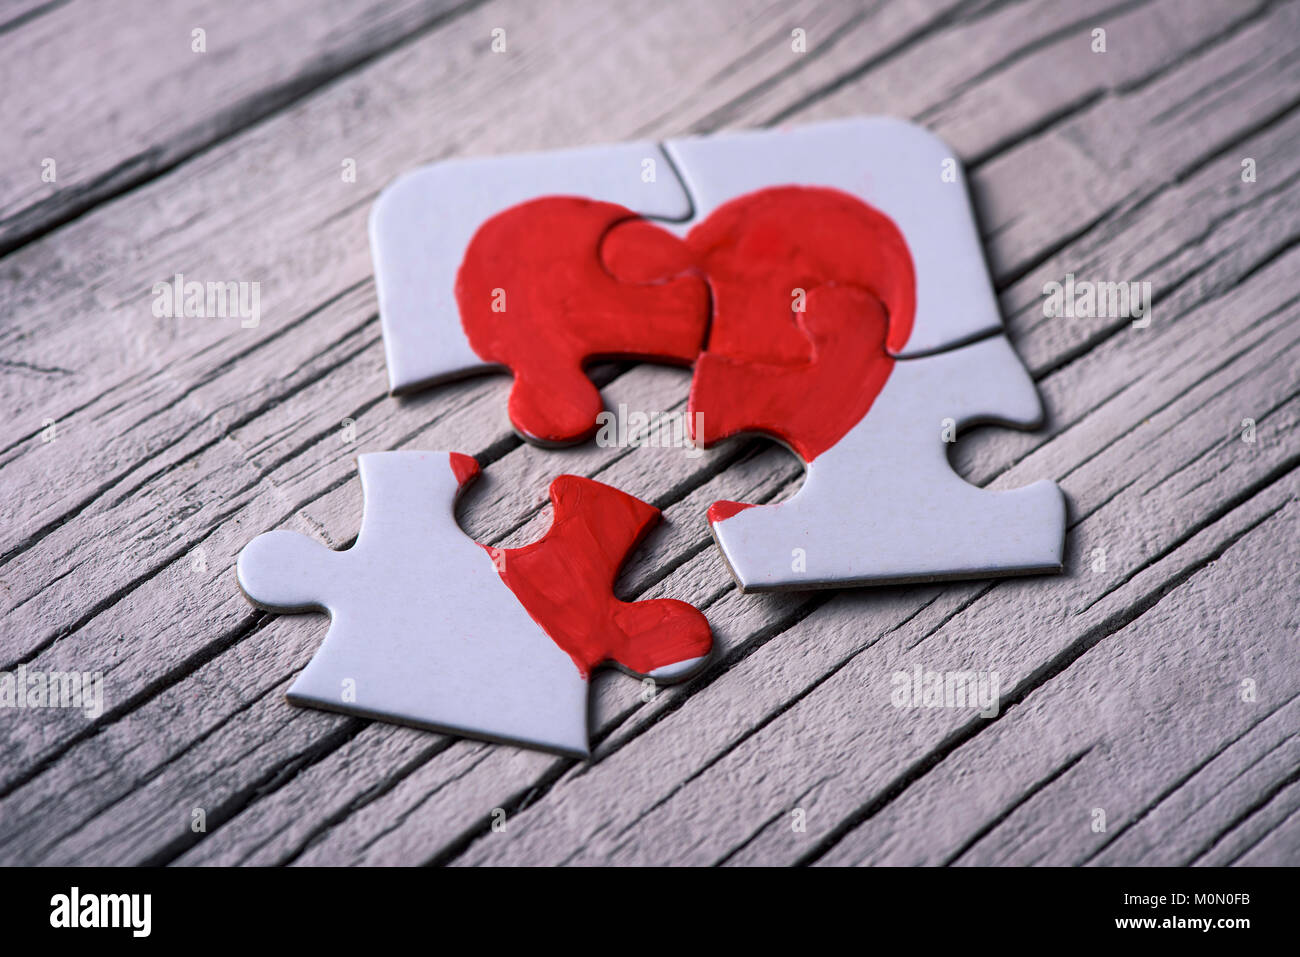 closeup of some separated pieces of a puzzle which together form a heart on a white rustic wooden surface, depicting the idea of rupture or cooperatio Stock Photo